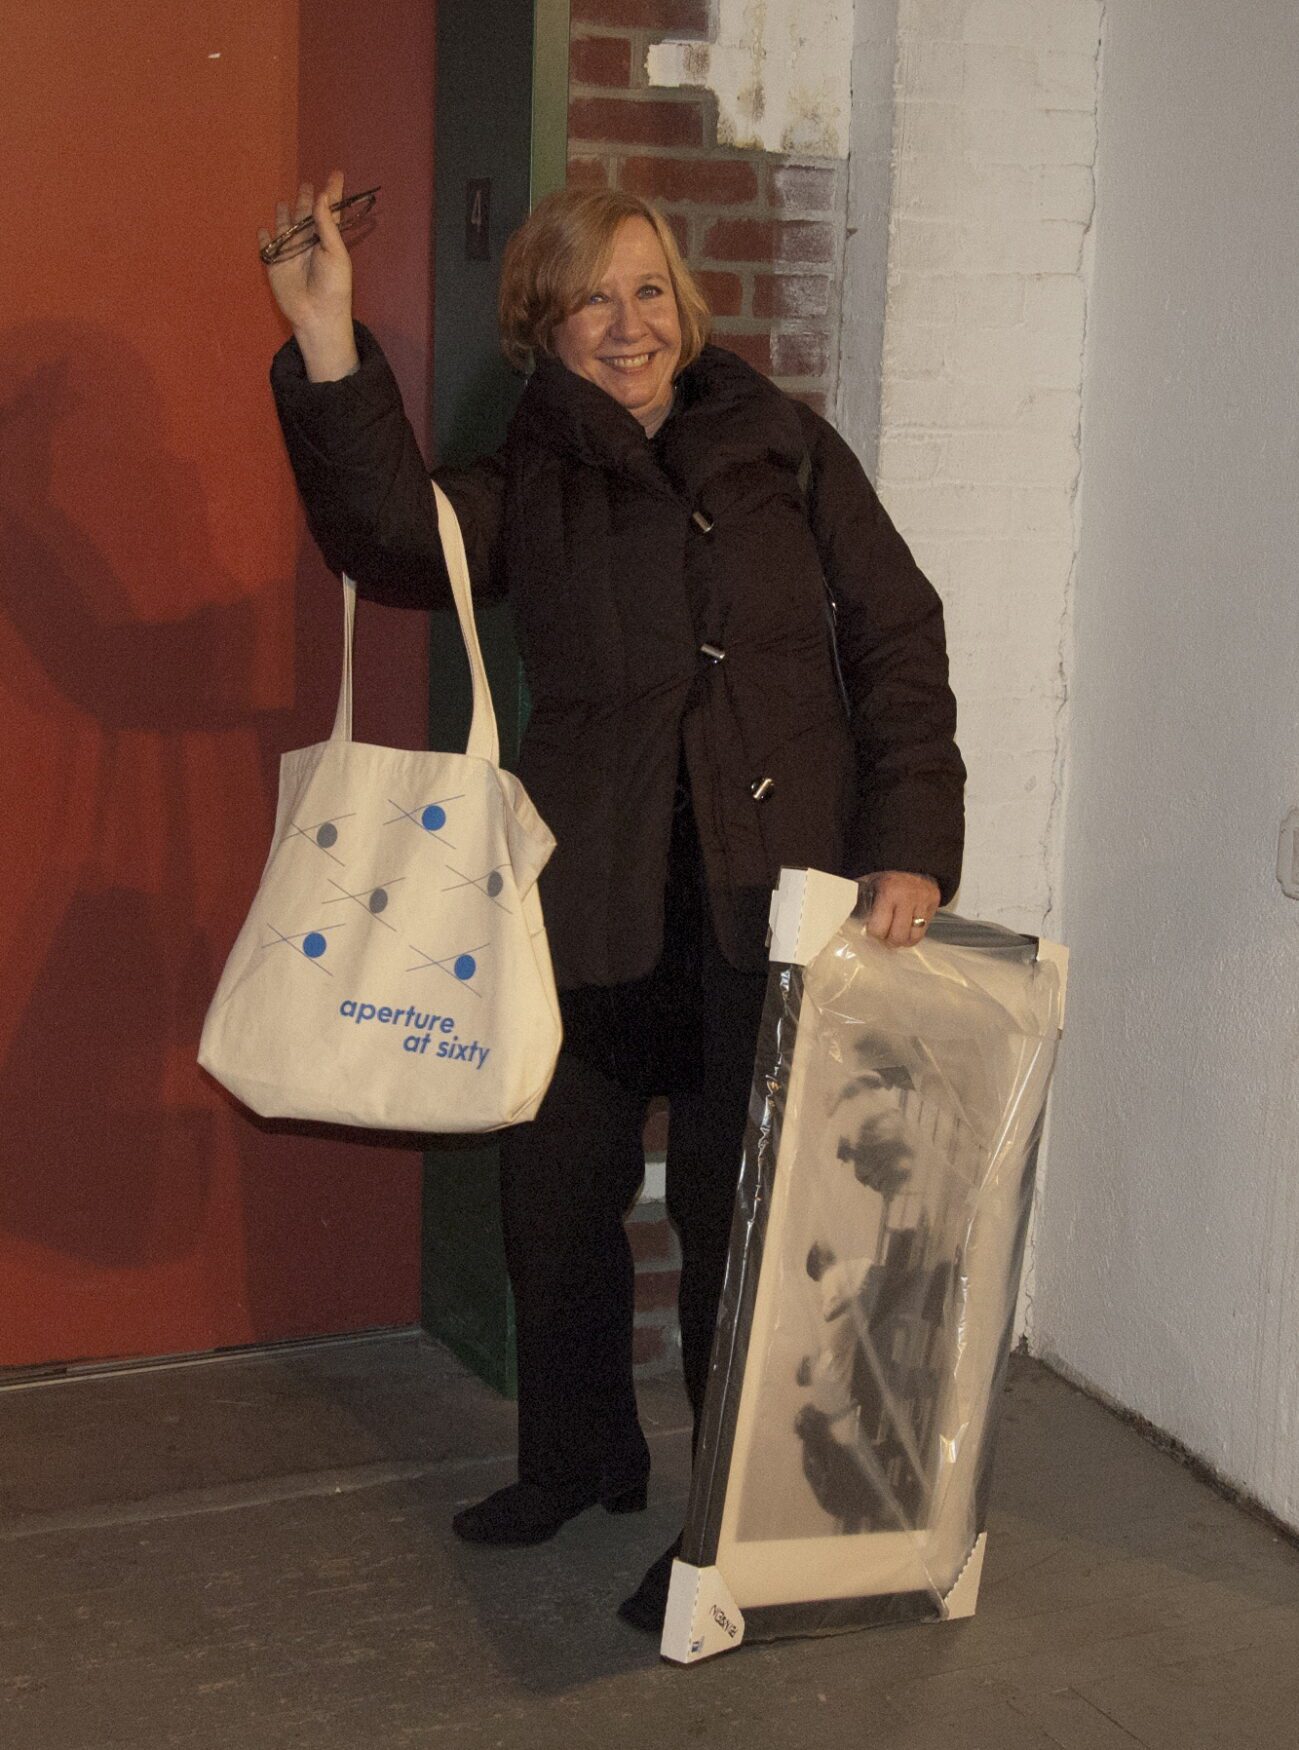 Our super special publicist, Andrea Smith, stays late into the evening and leaves with a framed print to support Hurricane Sandy relief efforts! Thank you Andrea!